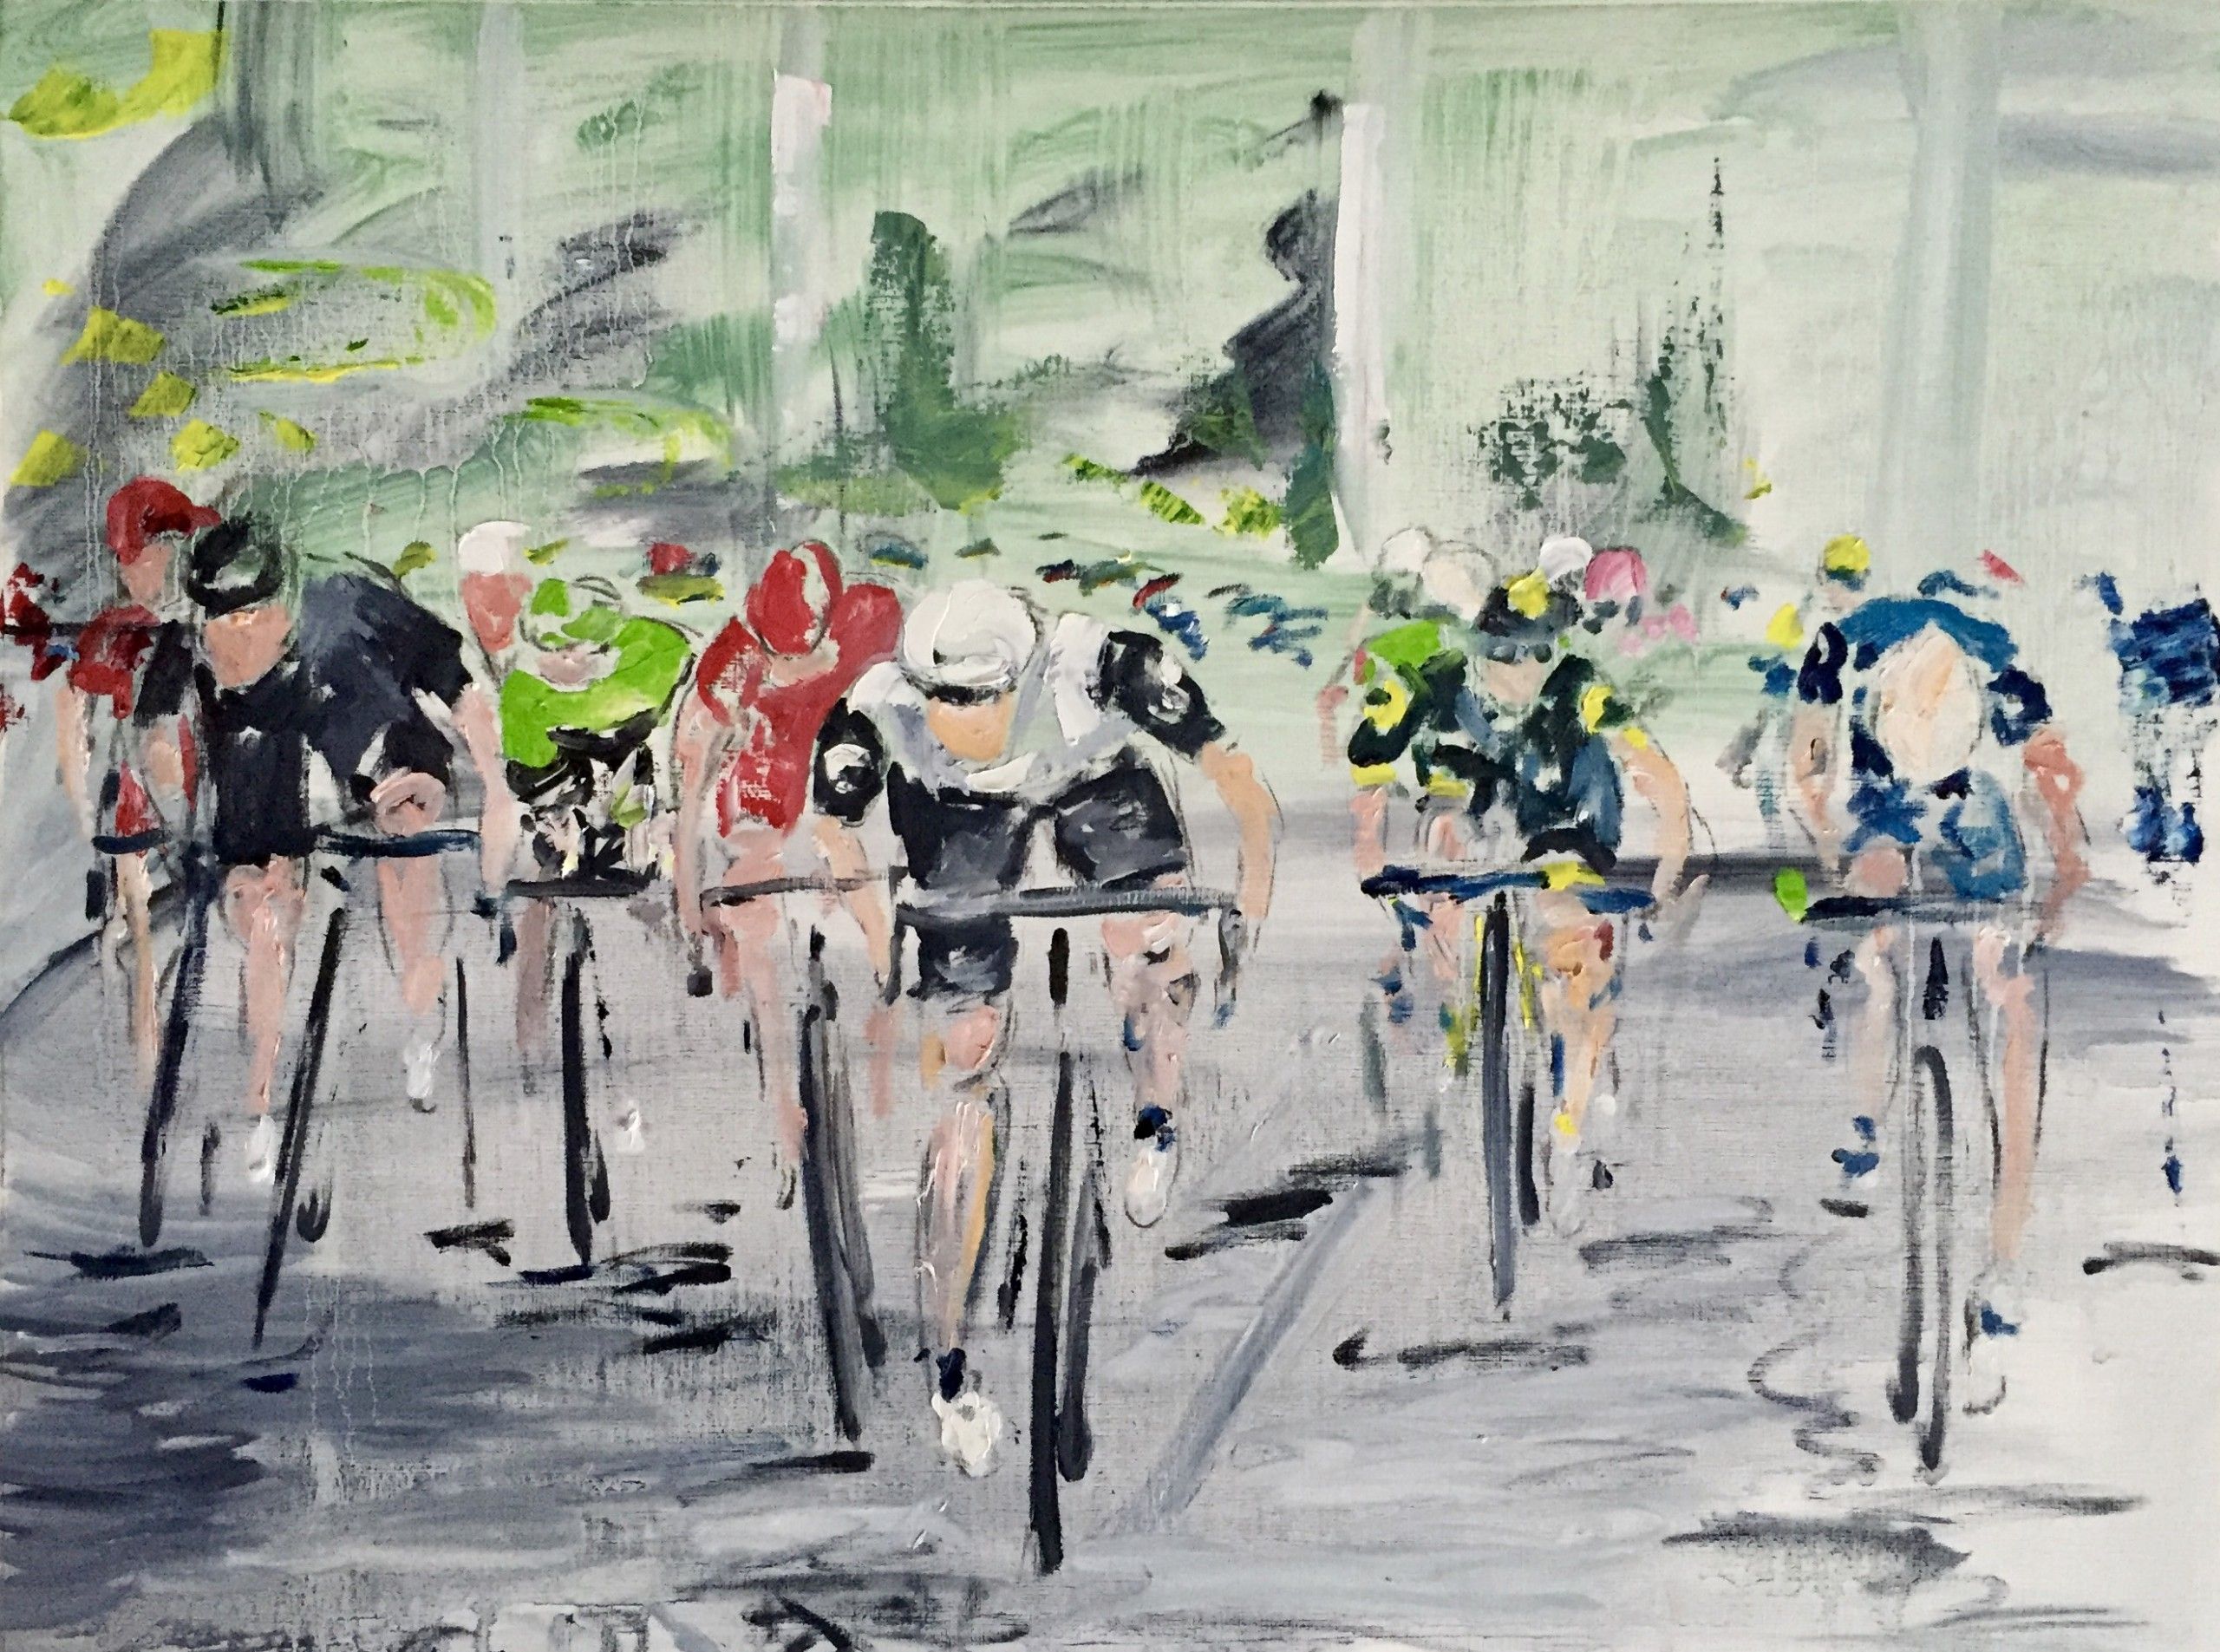 Tour de France - Racing for the line. by Garth Bayley